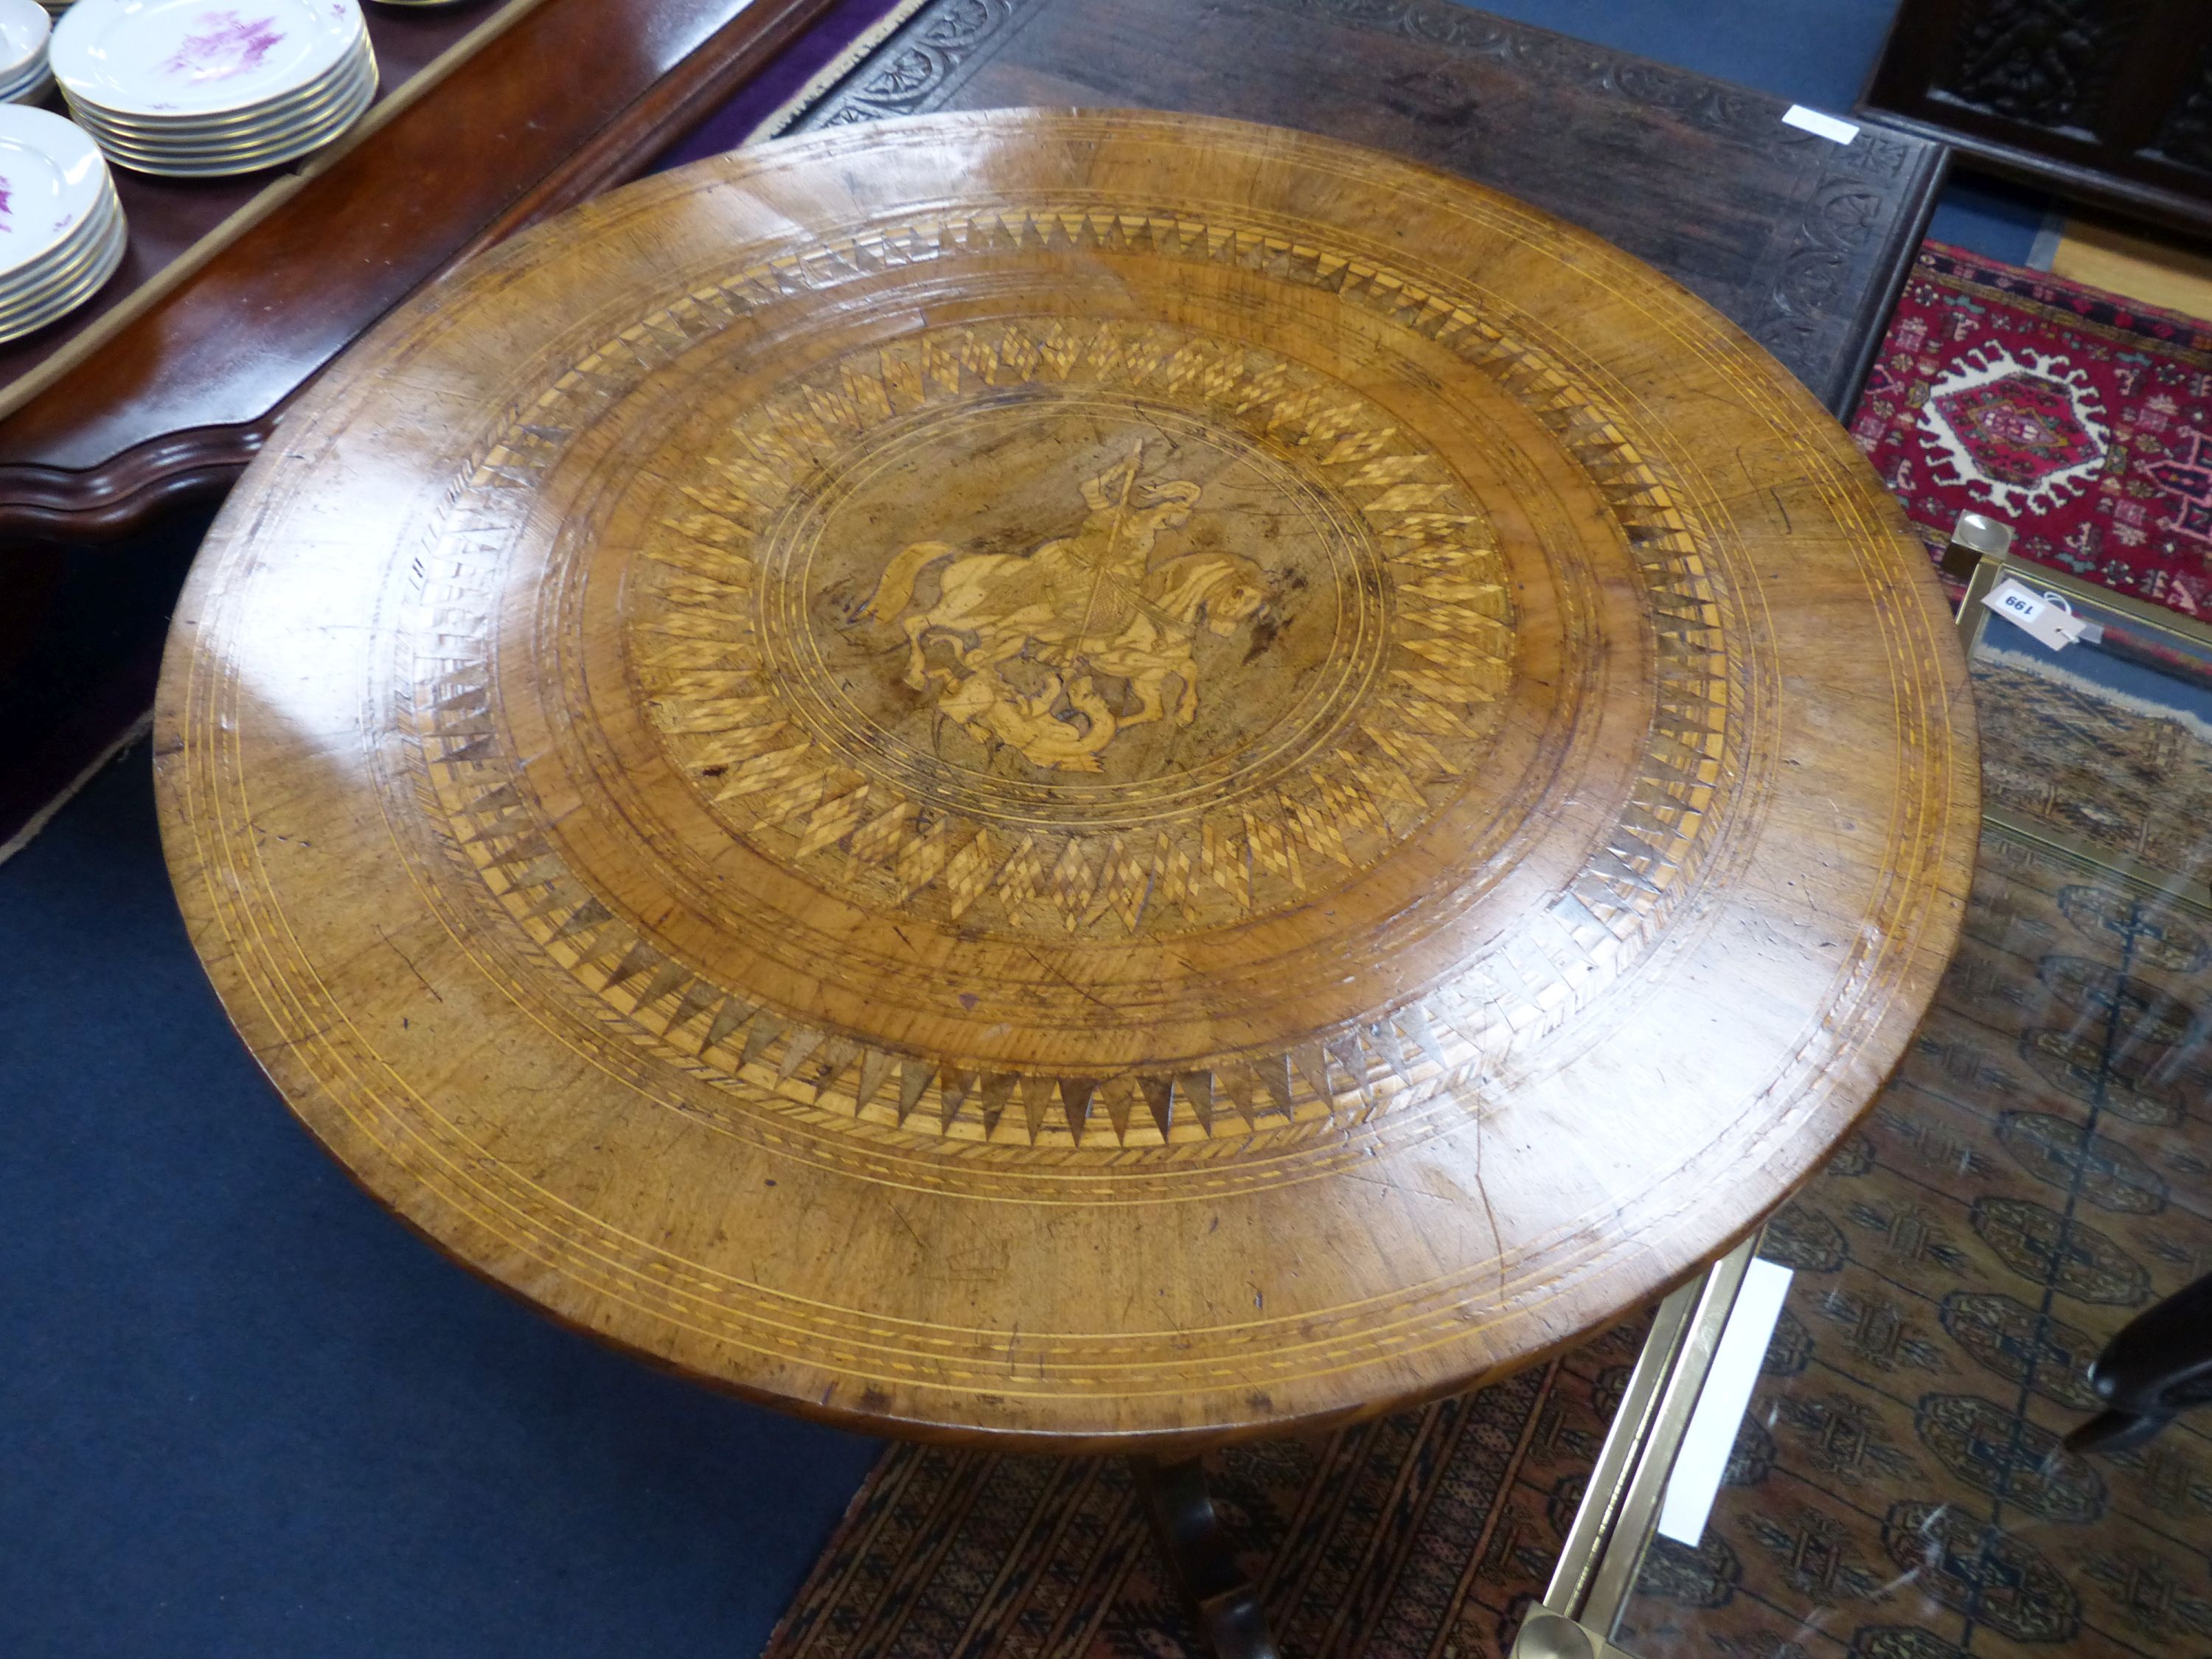 A 19th century Sorrento inlaid table, decorated centrally with a scene of St. George slaying the dragon, diameter 89cm, height 77cm